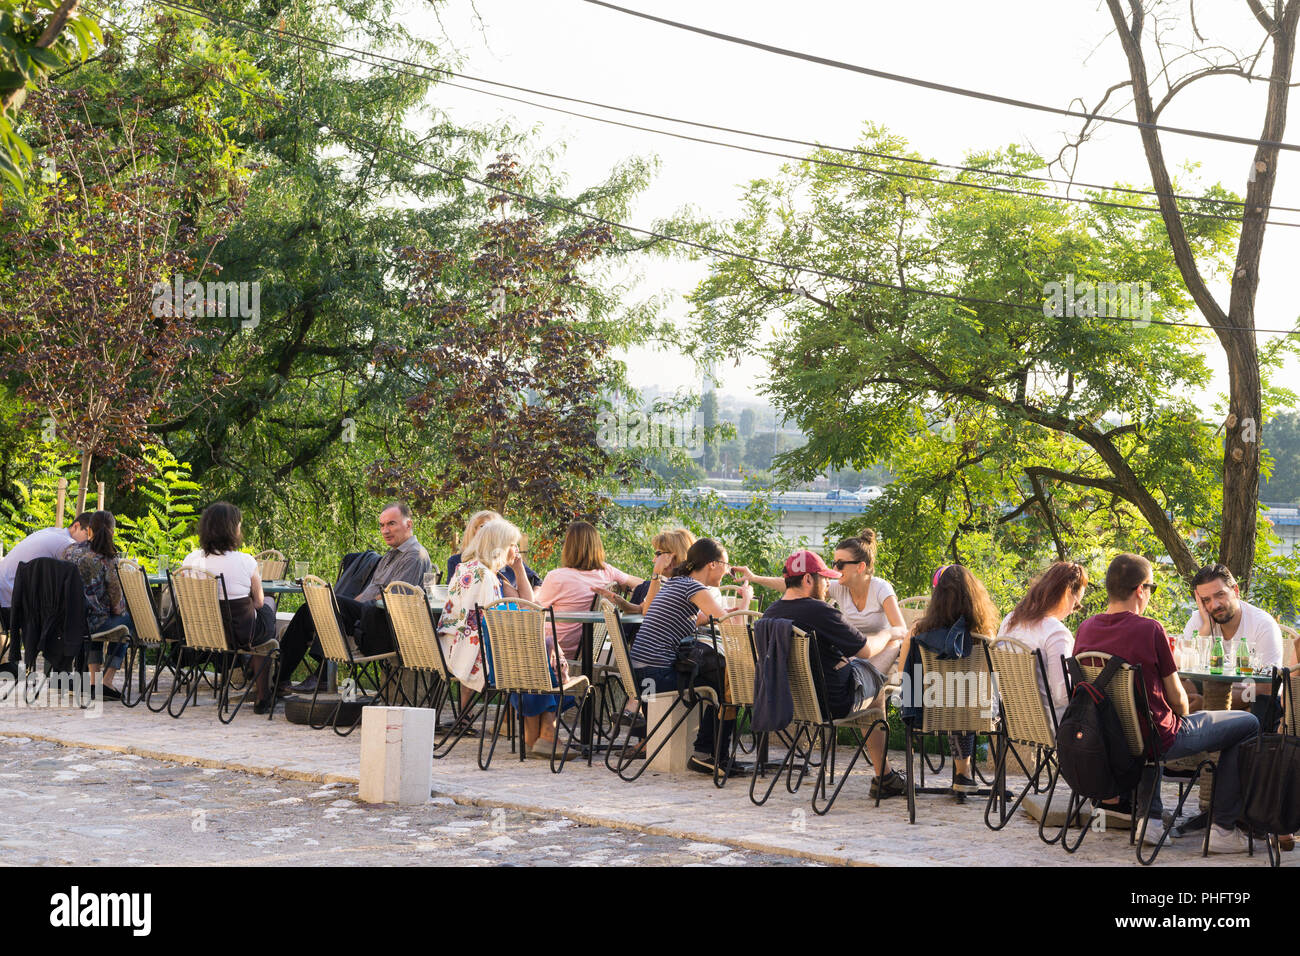 People enjoying afternoon sun at the Skica cafe in the Kosancicev venac area of Belgrade, Serbia. Stock Photo